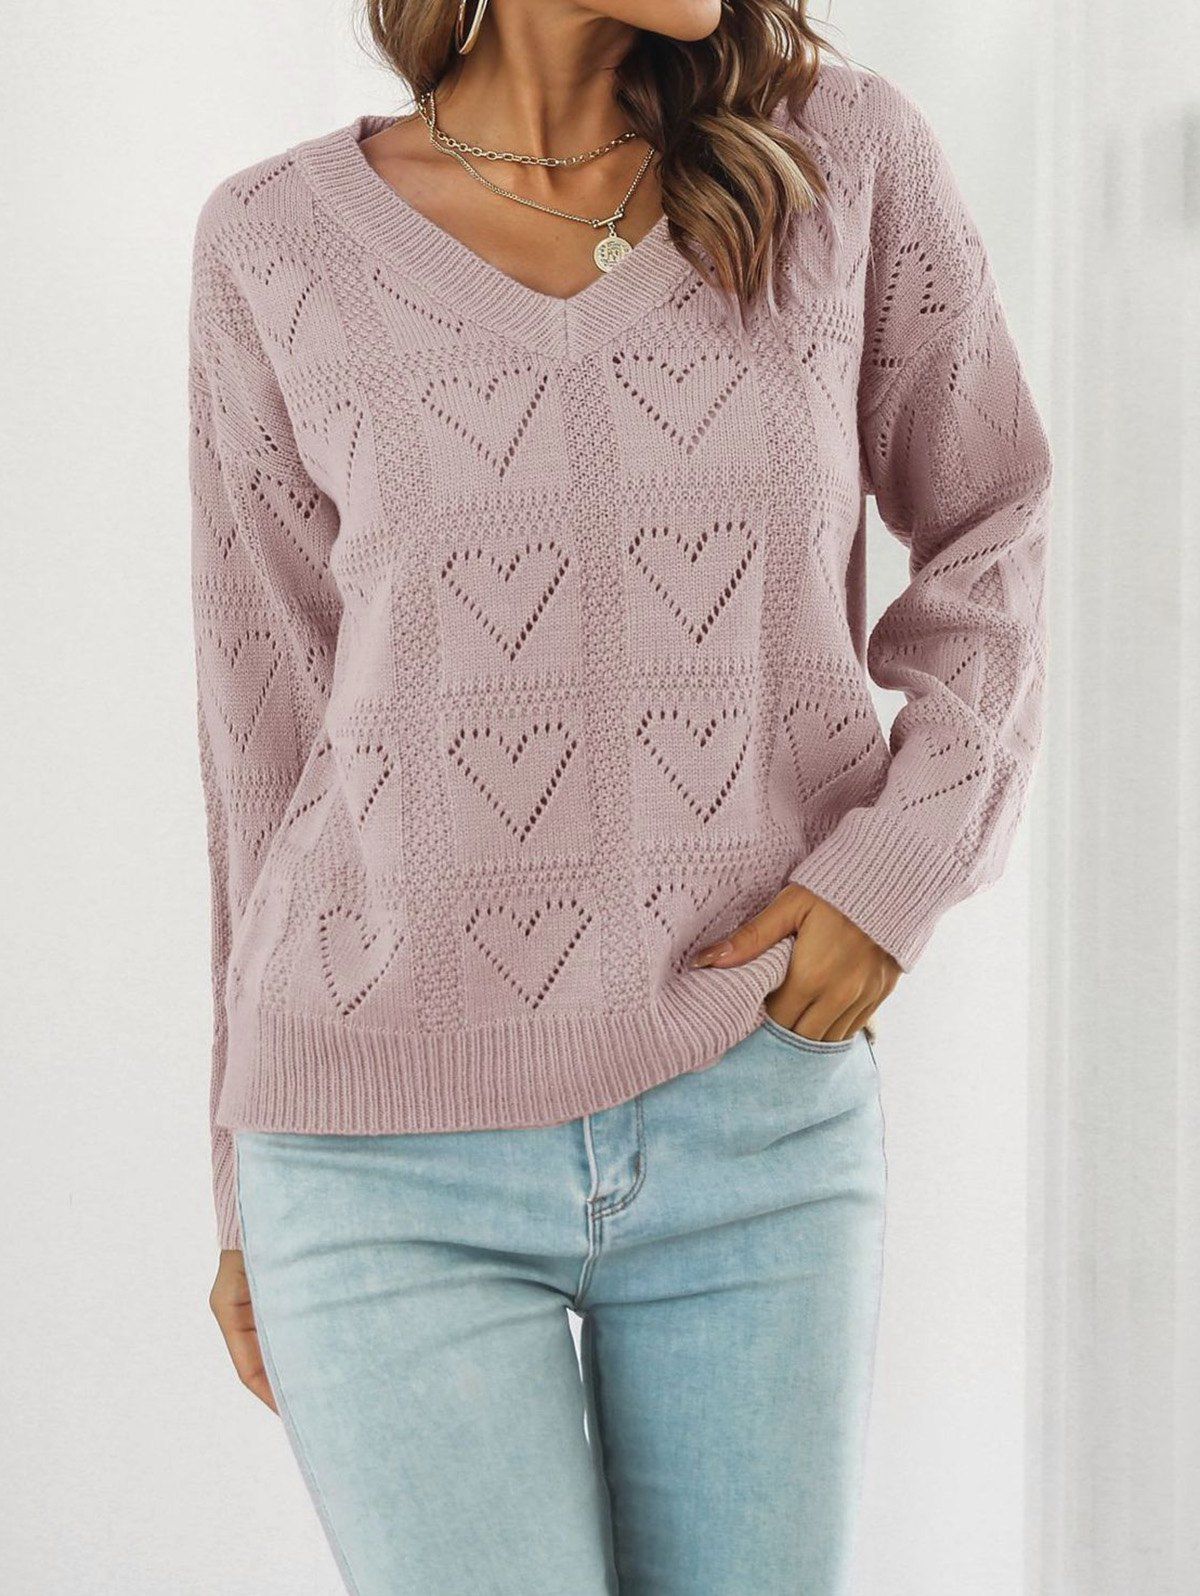 Heart Pattern Sweater Hollow Out Plain Color V Neck Long Sleeve Pullover Sweater - LIGHT PINK L